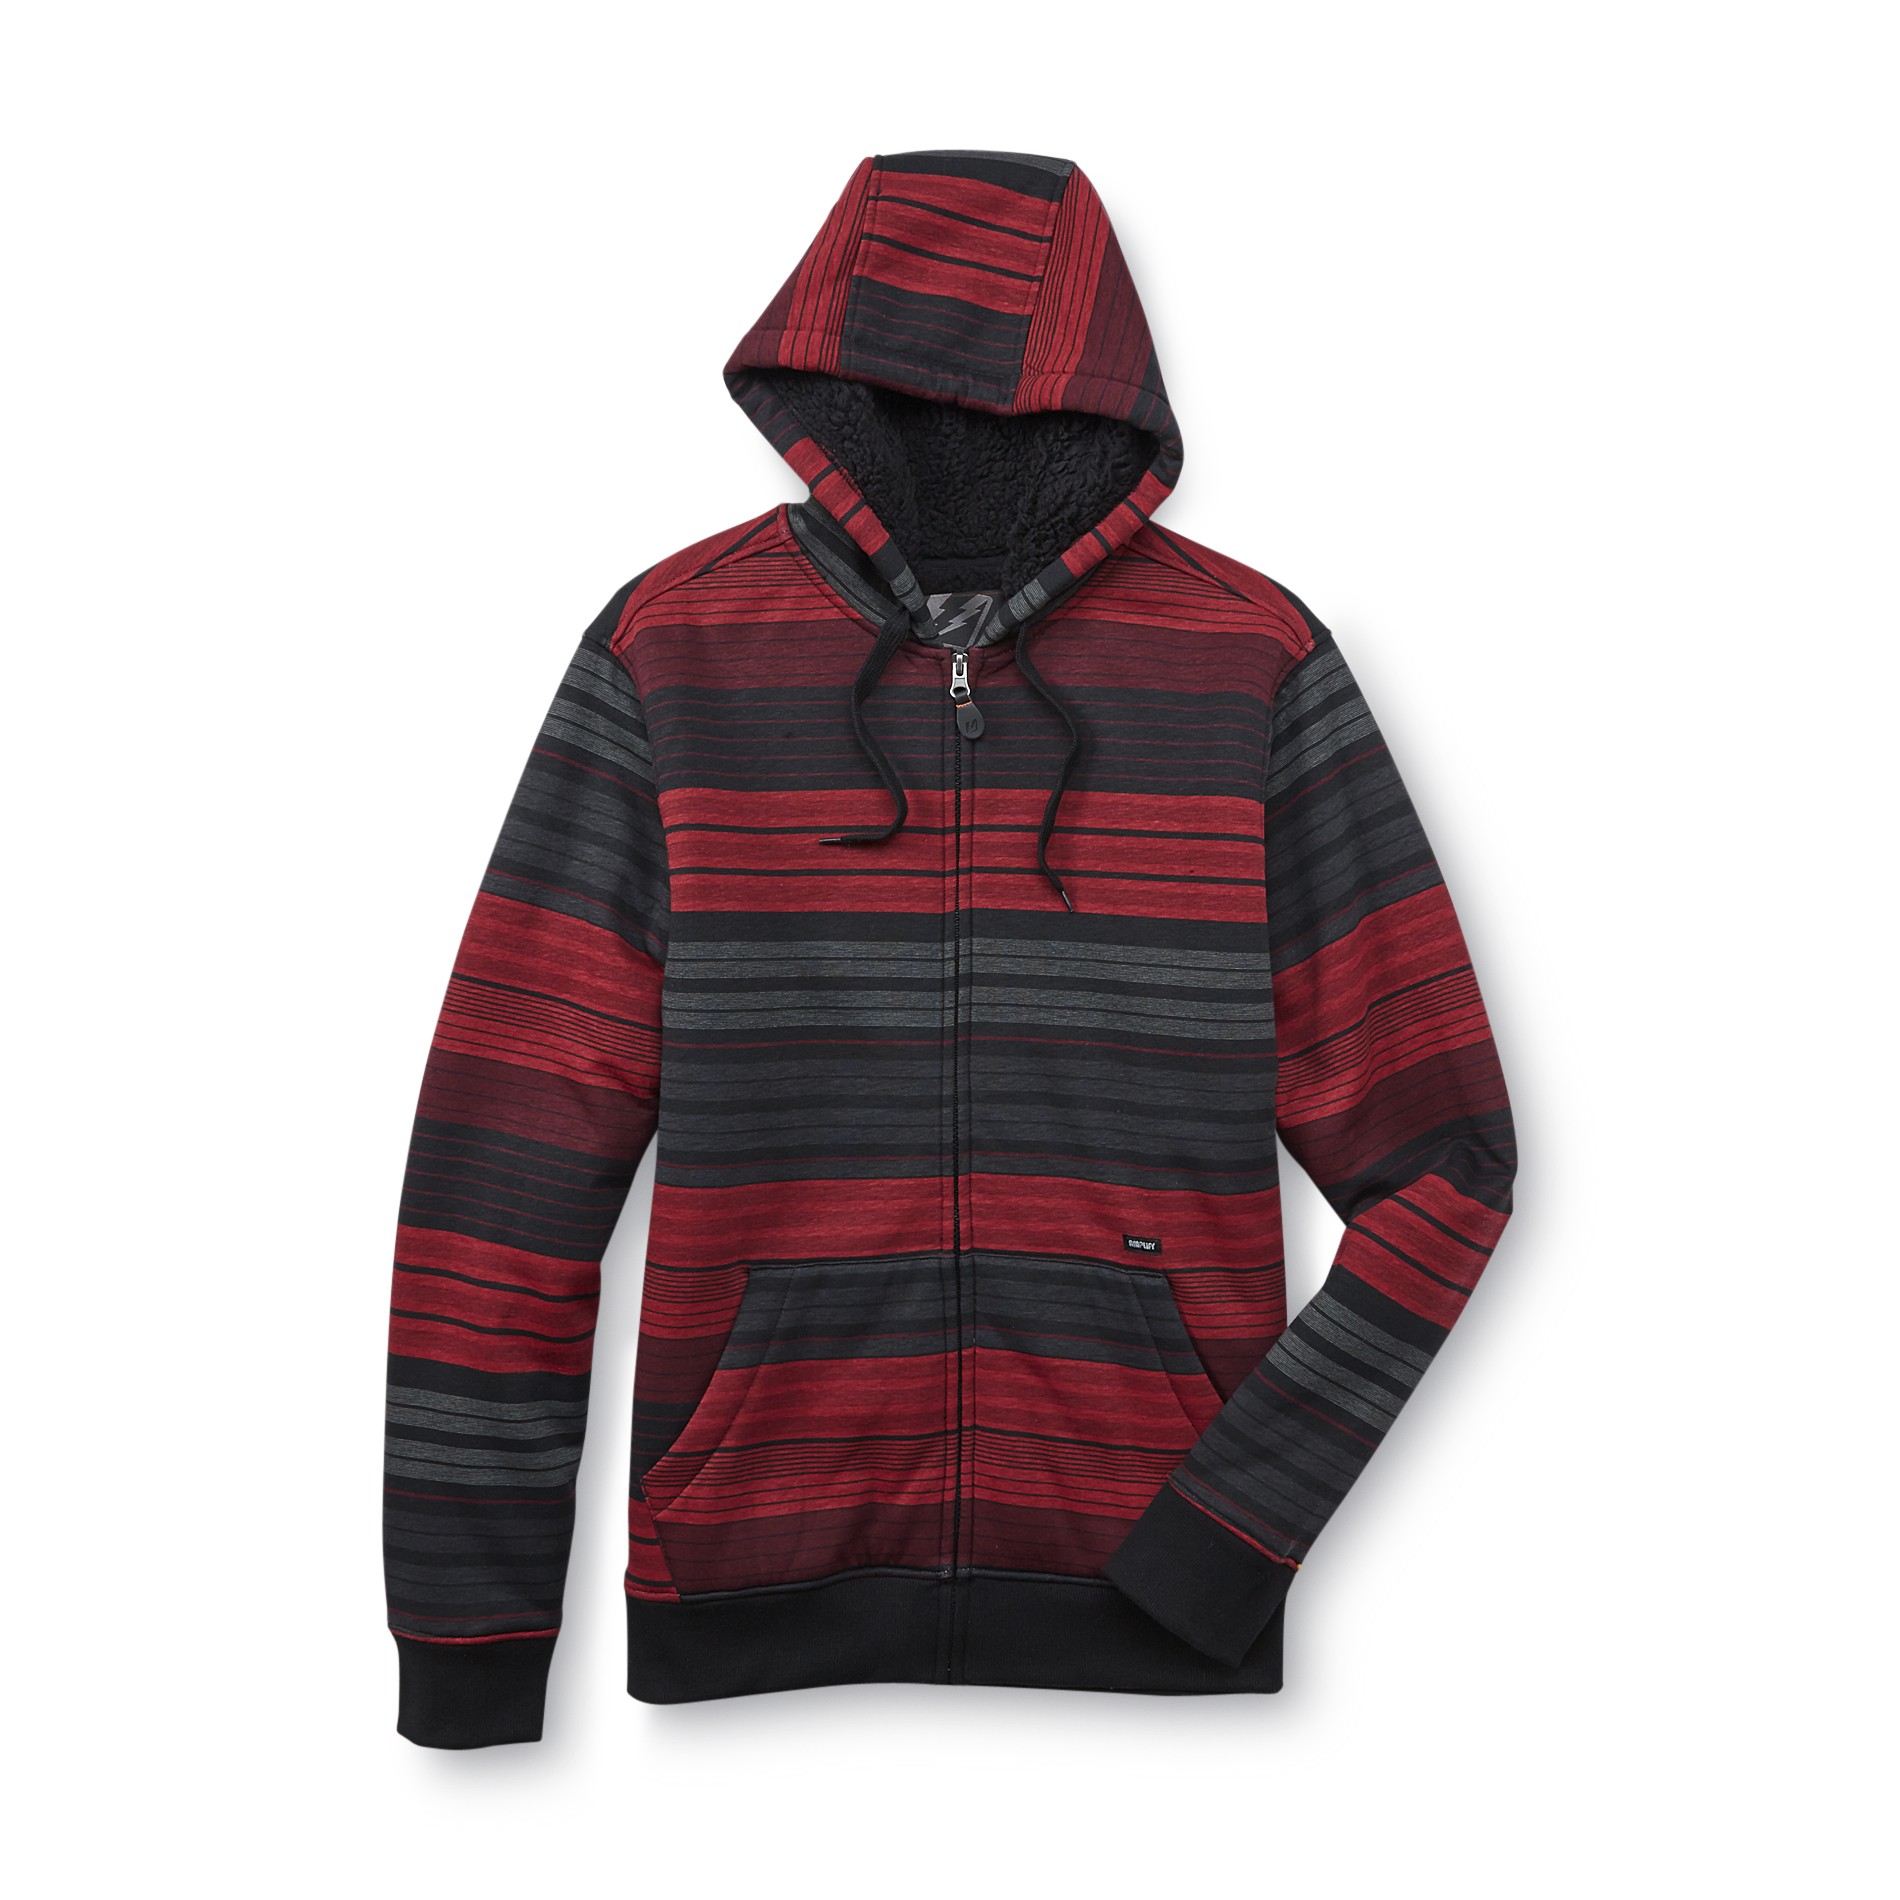 Amplify Young Men's Sherpa Hoodie Jacket - Striped